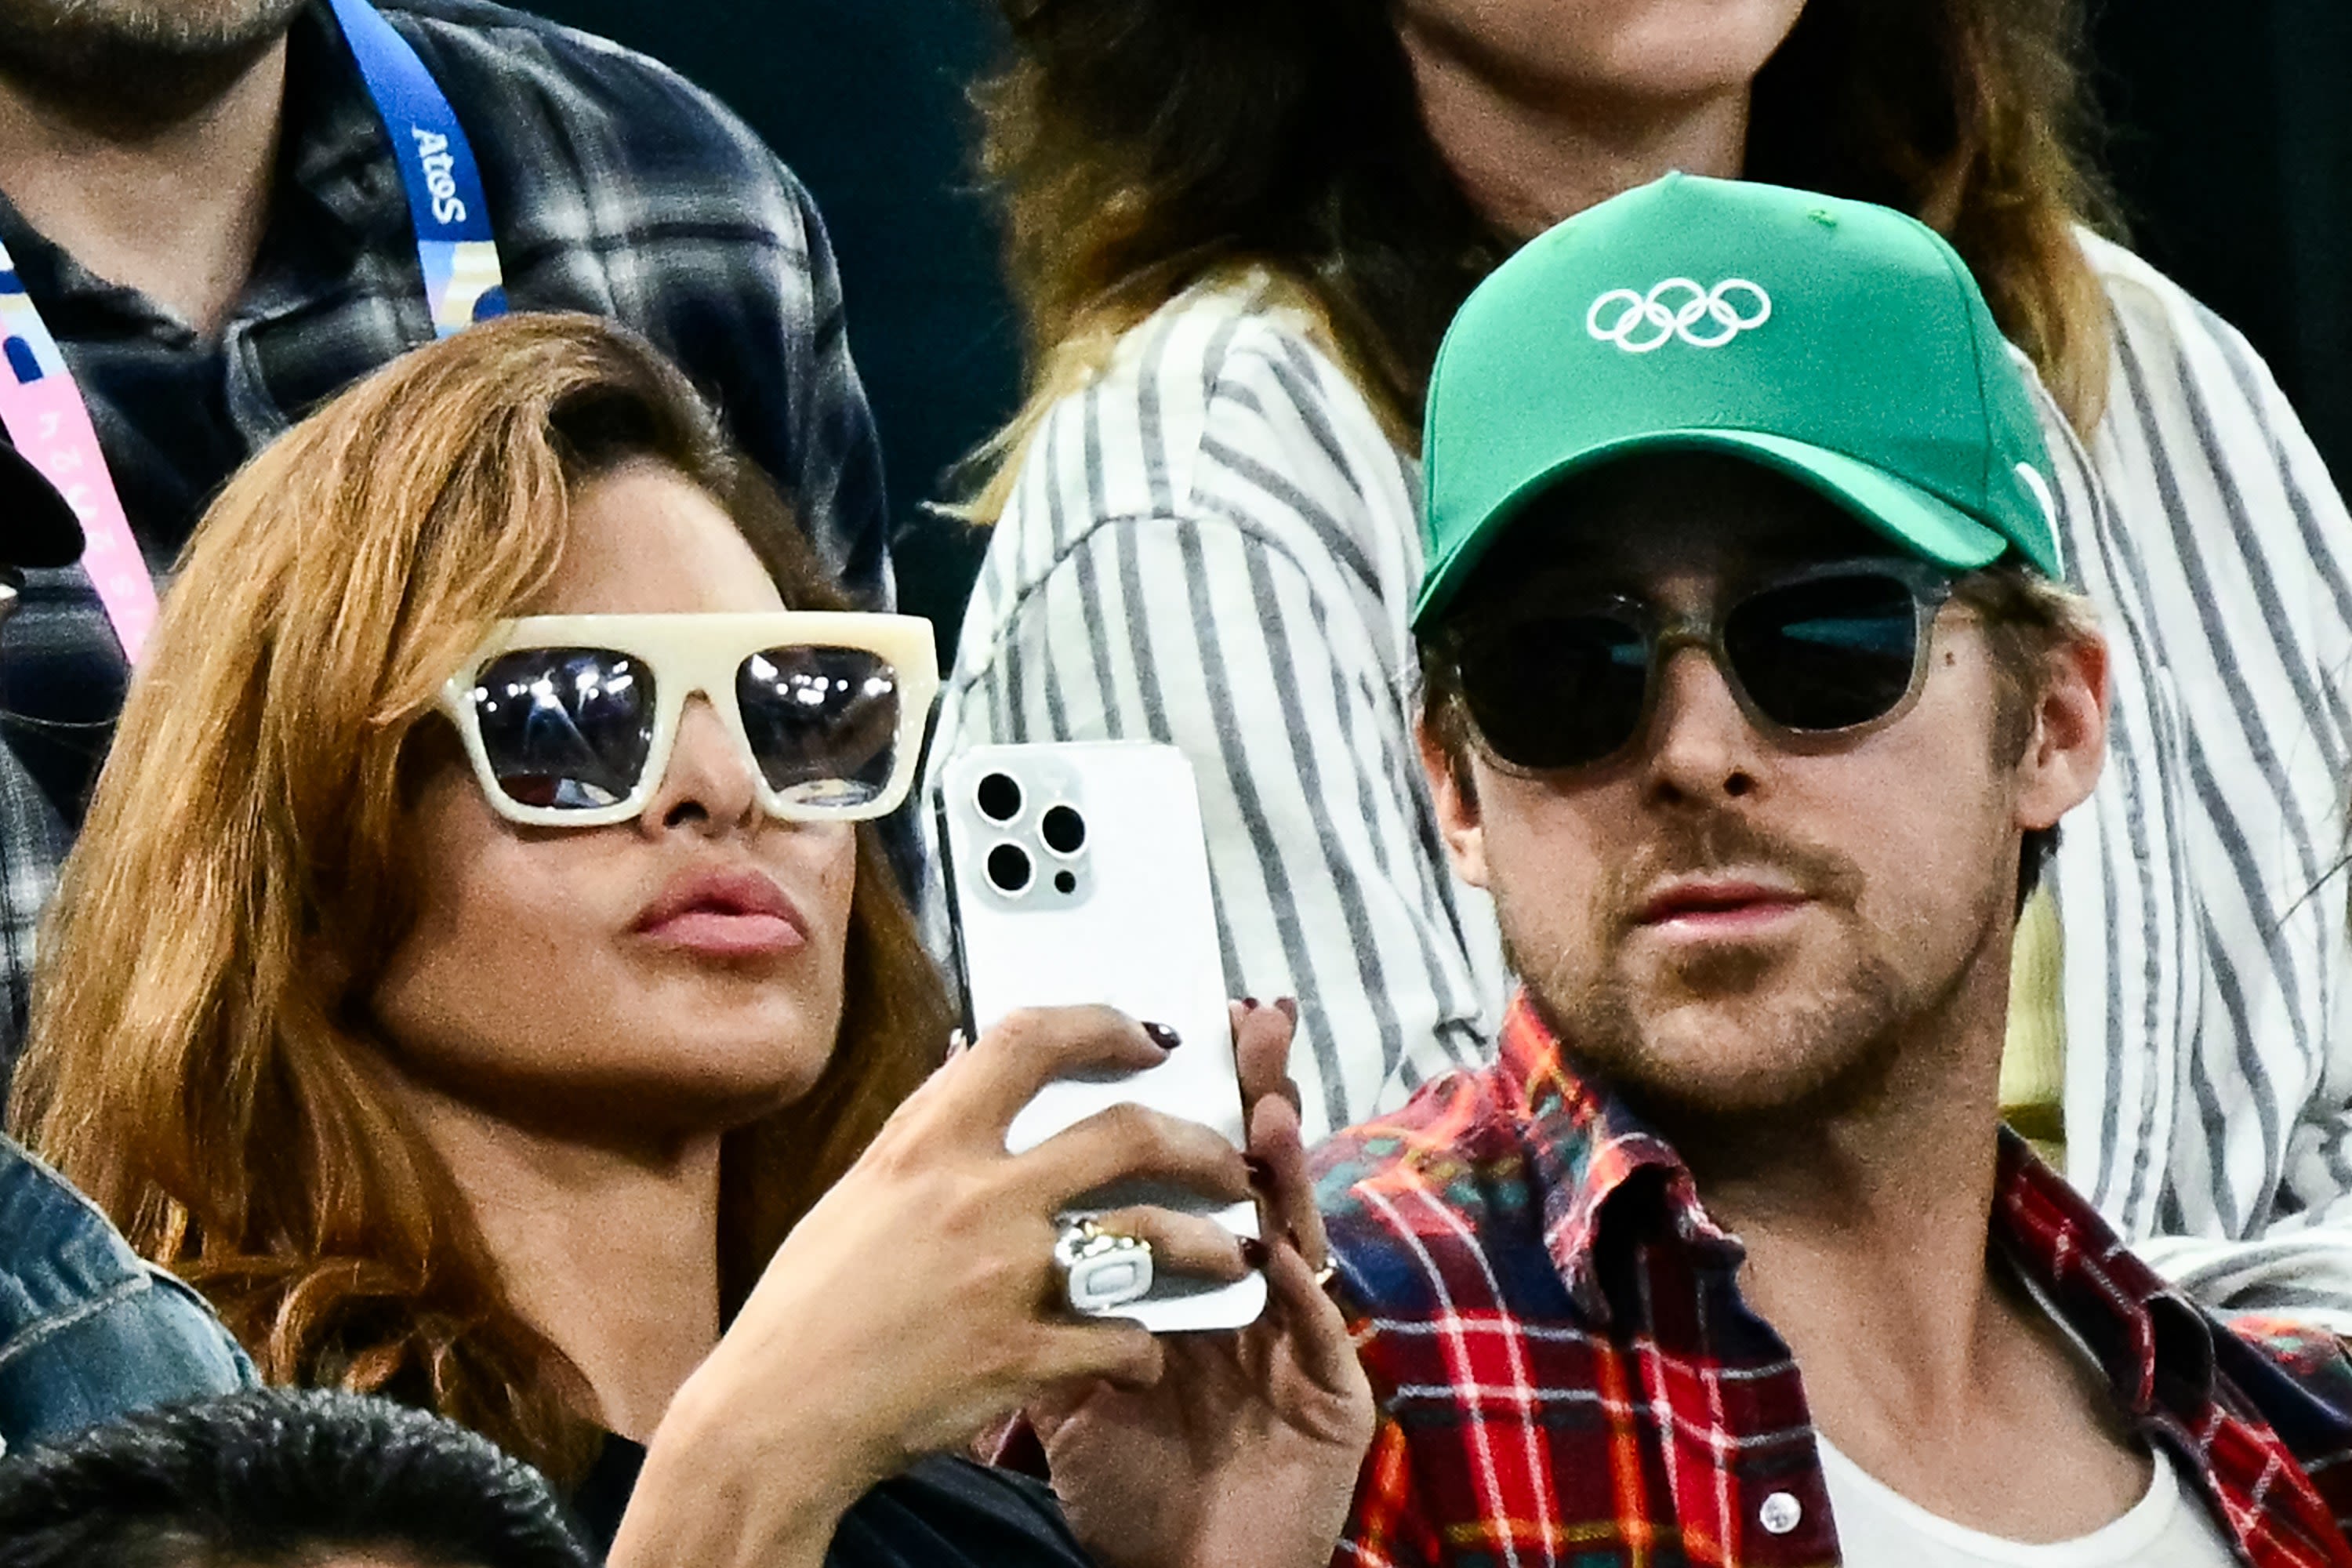 Ryan Gosling and Eva Mendes Shared Extremely Rare PDA at the 2024 Paris Olympics